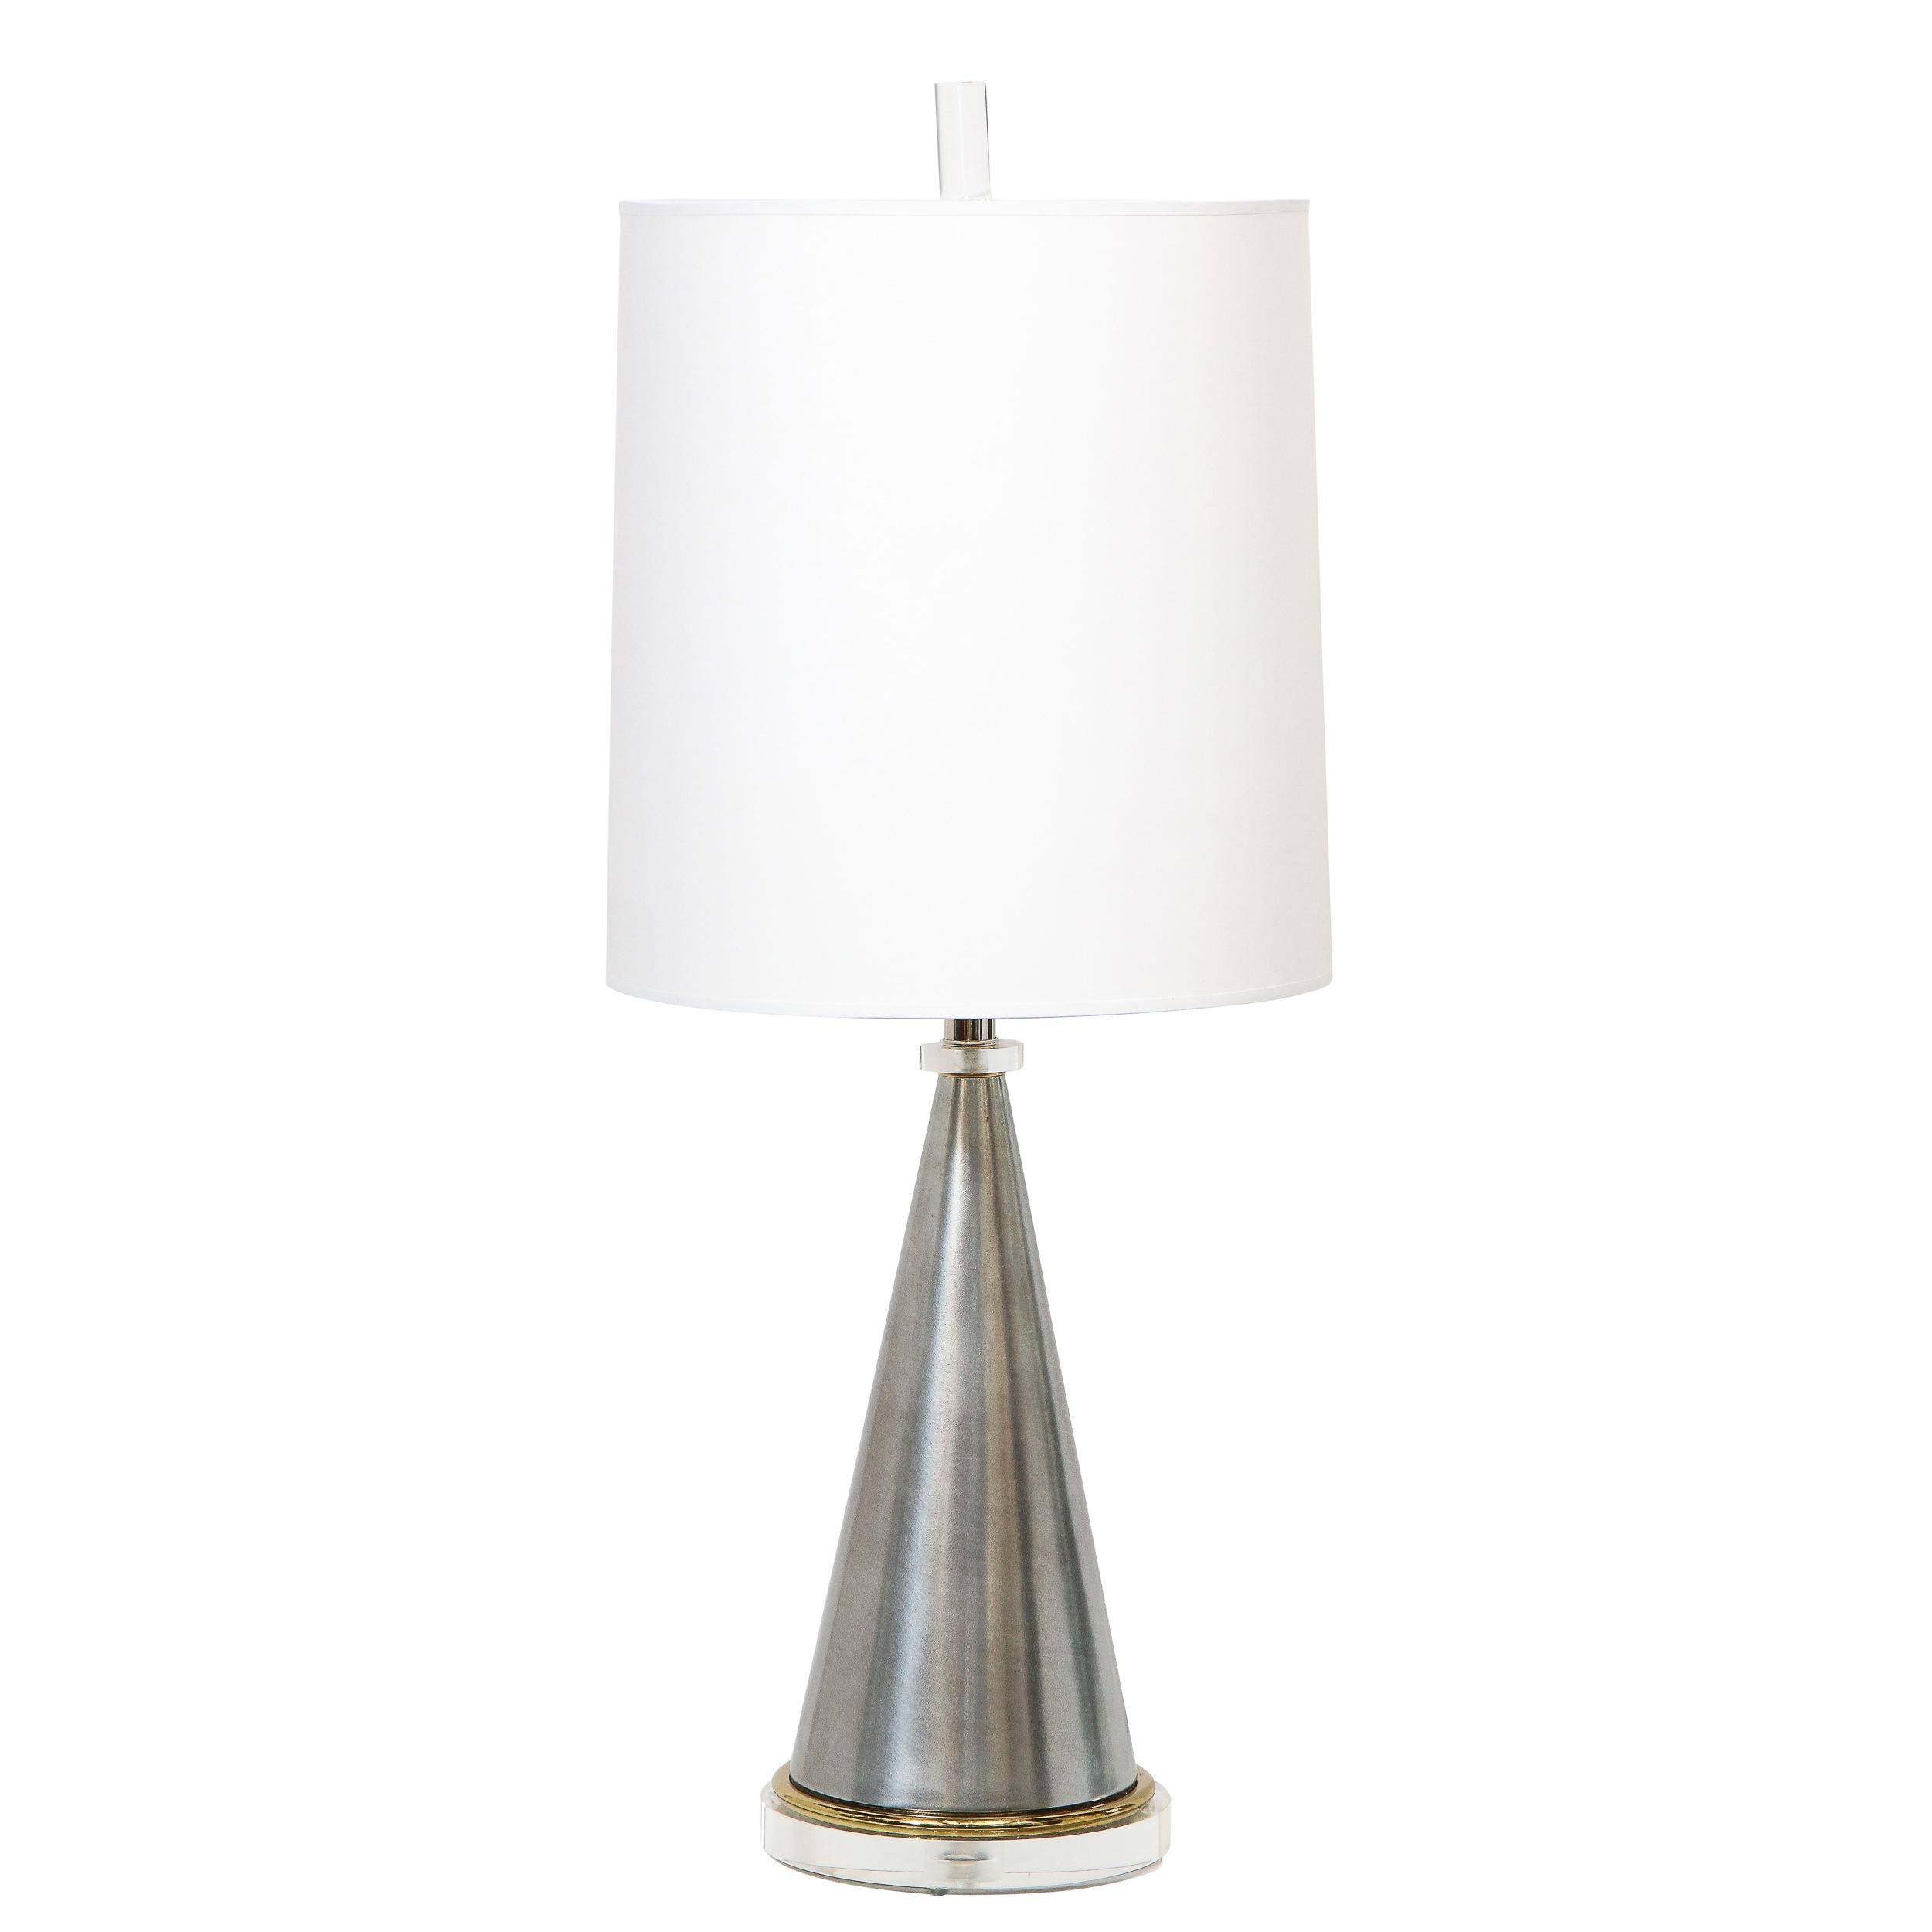 This stunning pair of table lamps were realized in the United States, circa 1960. They feature circular translucent Lucite bases with circular brass detailing supporting conical tapering brushed aluminum bodies. The lamps offer a ringed Lucite